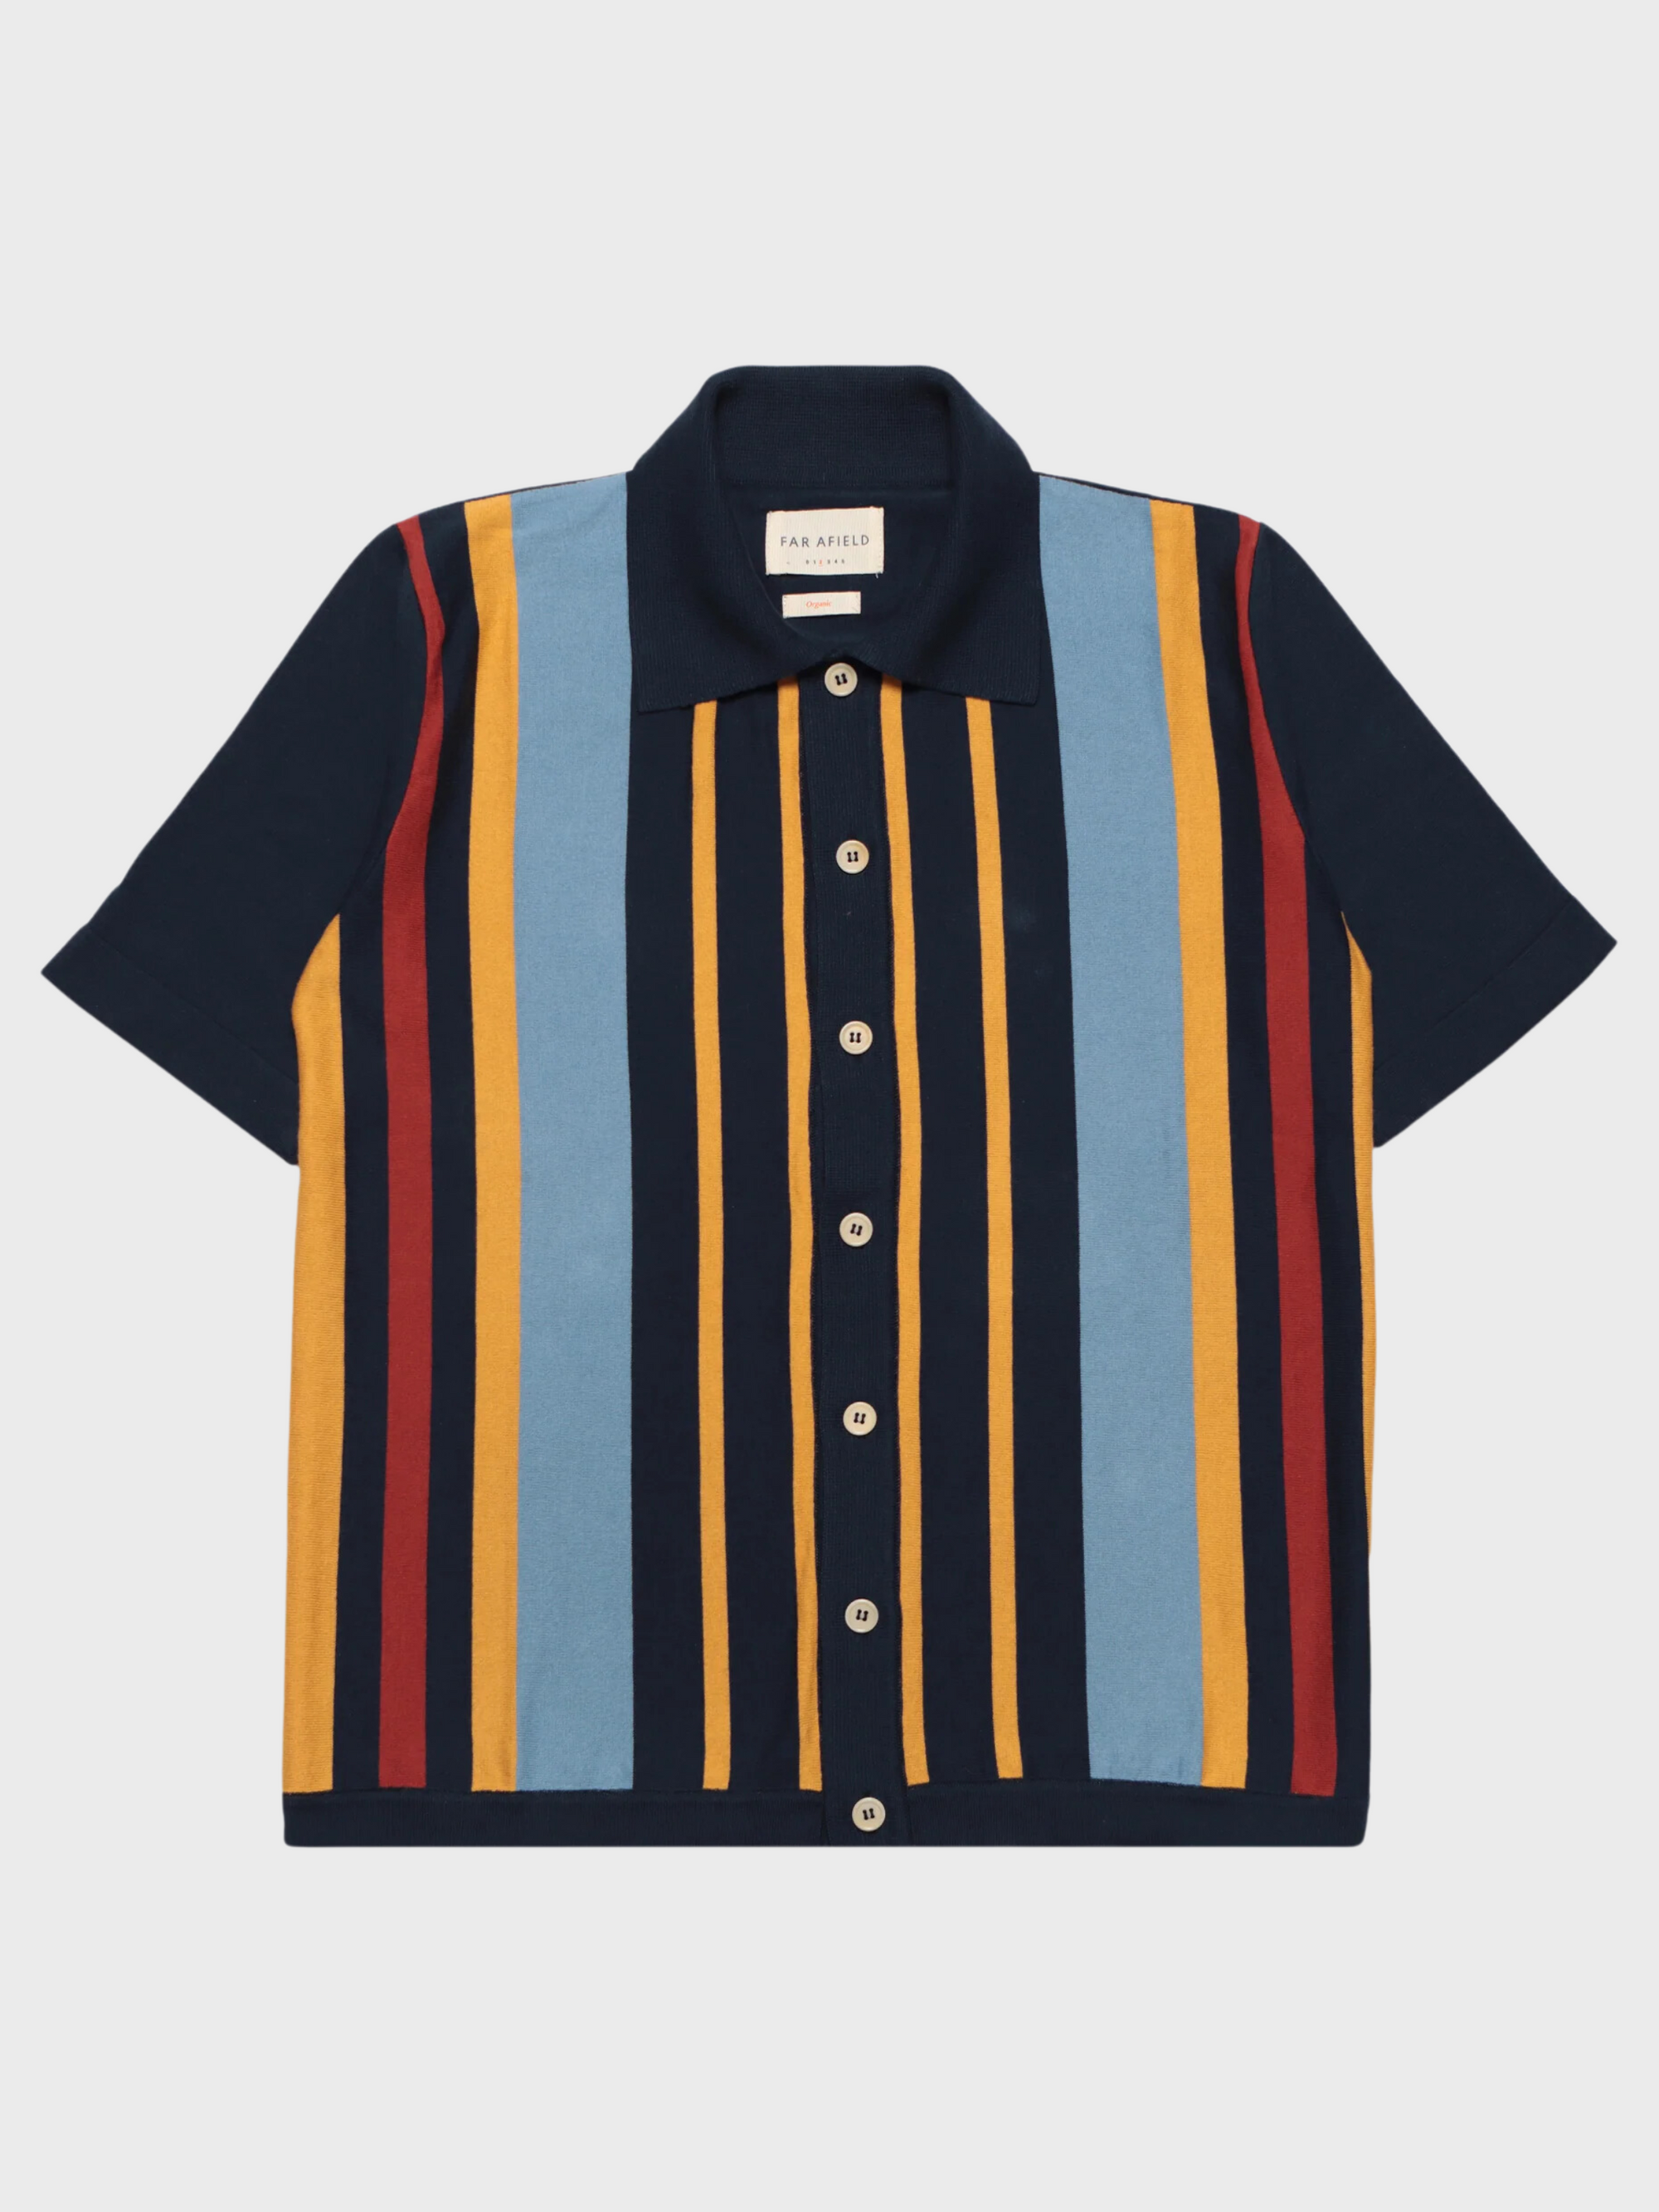 Far Afield Velzy SS Margate Stripe Cardigan Tee Navy SS24-Men's T-Shirts-S-Yaletown-Vancouver-Surrey-Canada